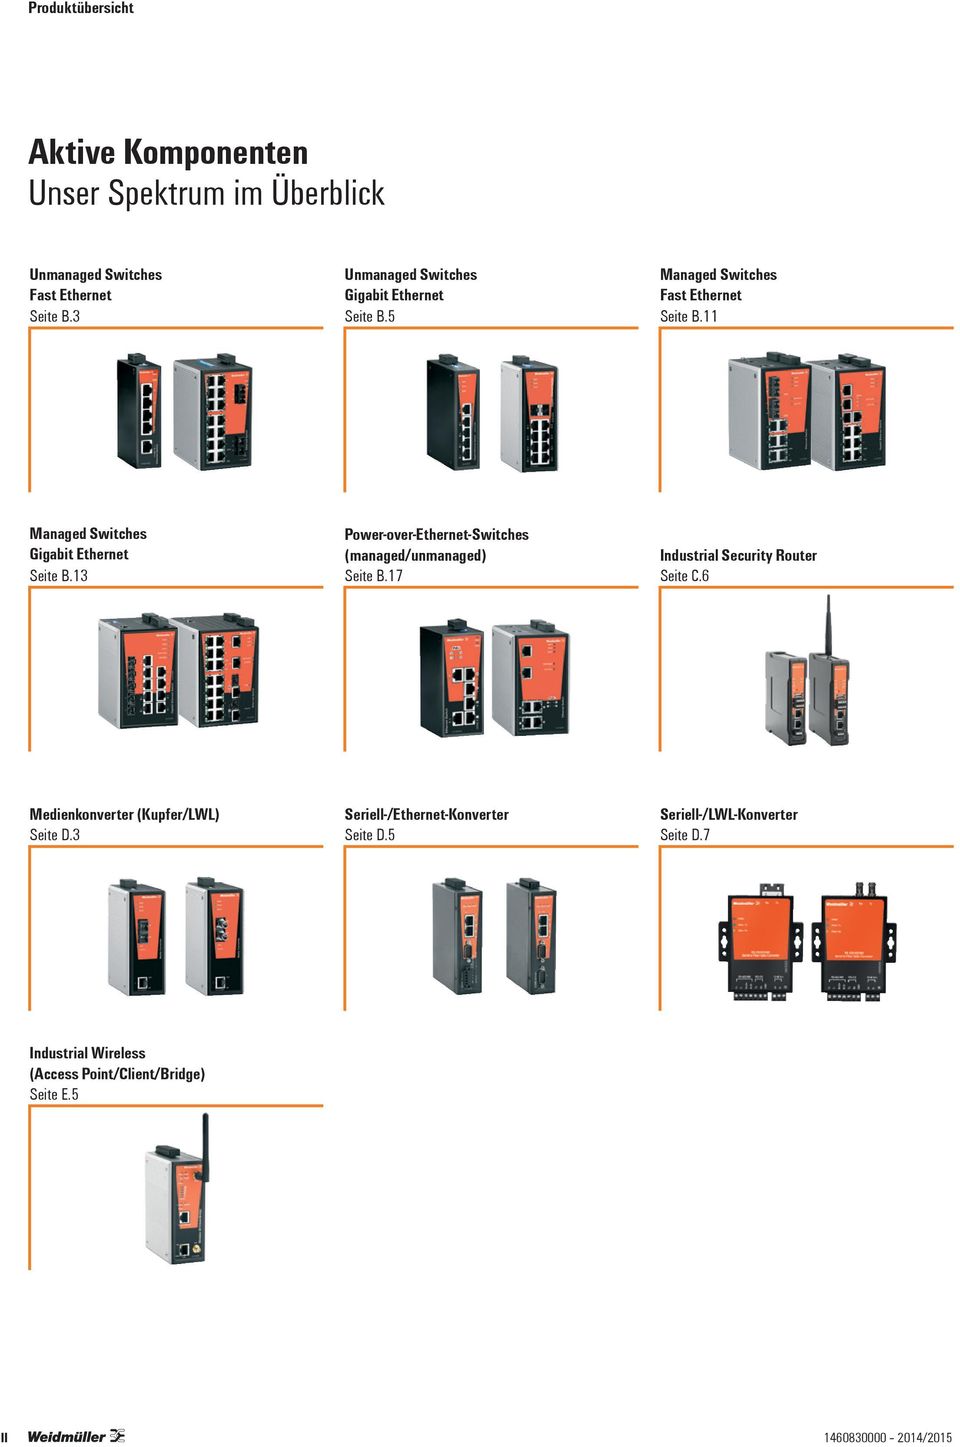 11 Managed Switches Power-over-Ethernet-Switches Gigabit Ethernet (managed/unmanaged) Industrial Security Router Seite B.13 Seite B.